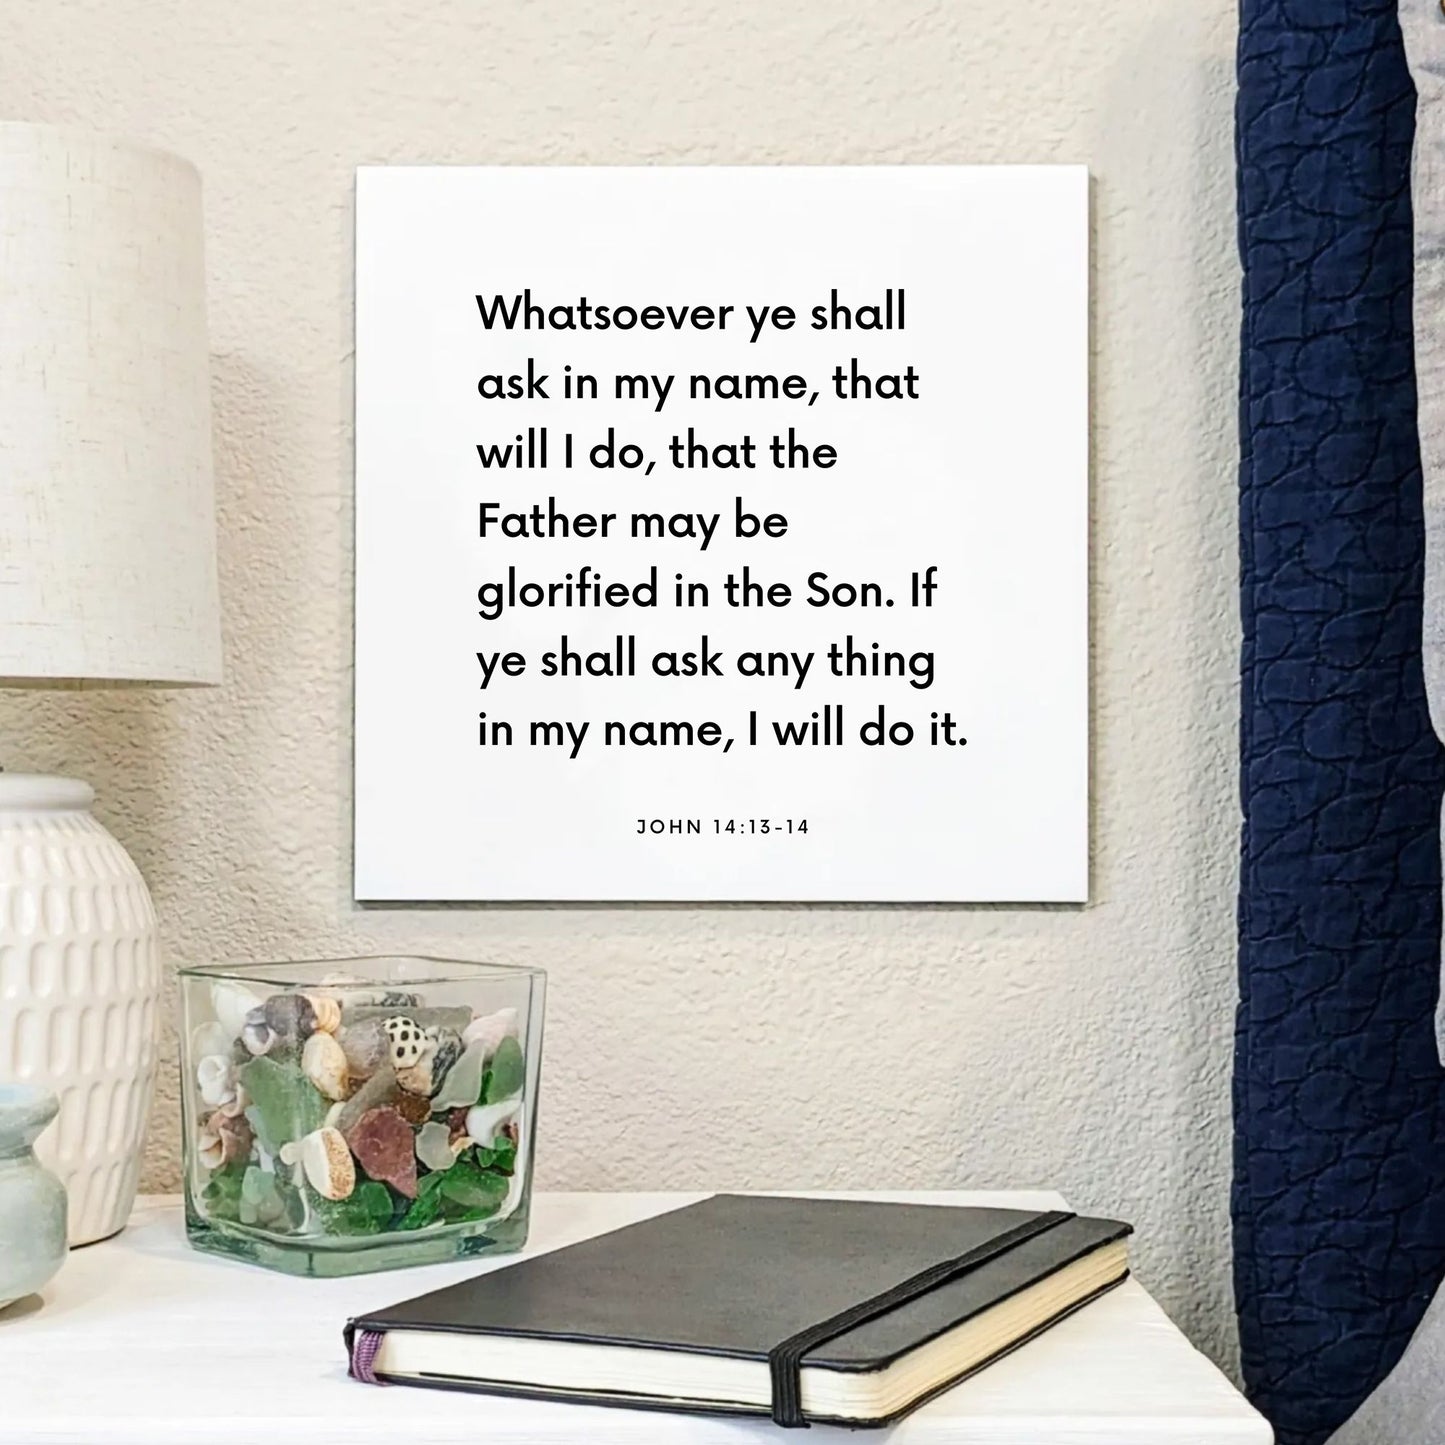 Bedside mouting of the scripture tile for John 14:13-14 - "Whatsoever ye shall ask in my name, that will I do"